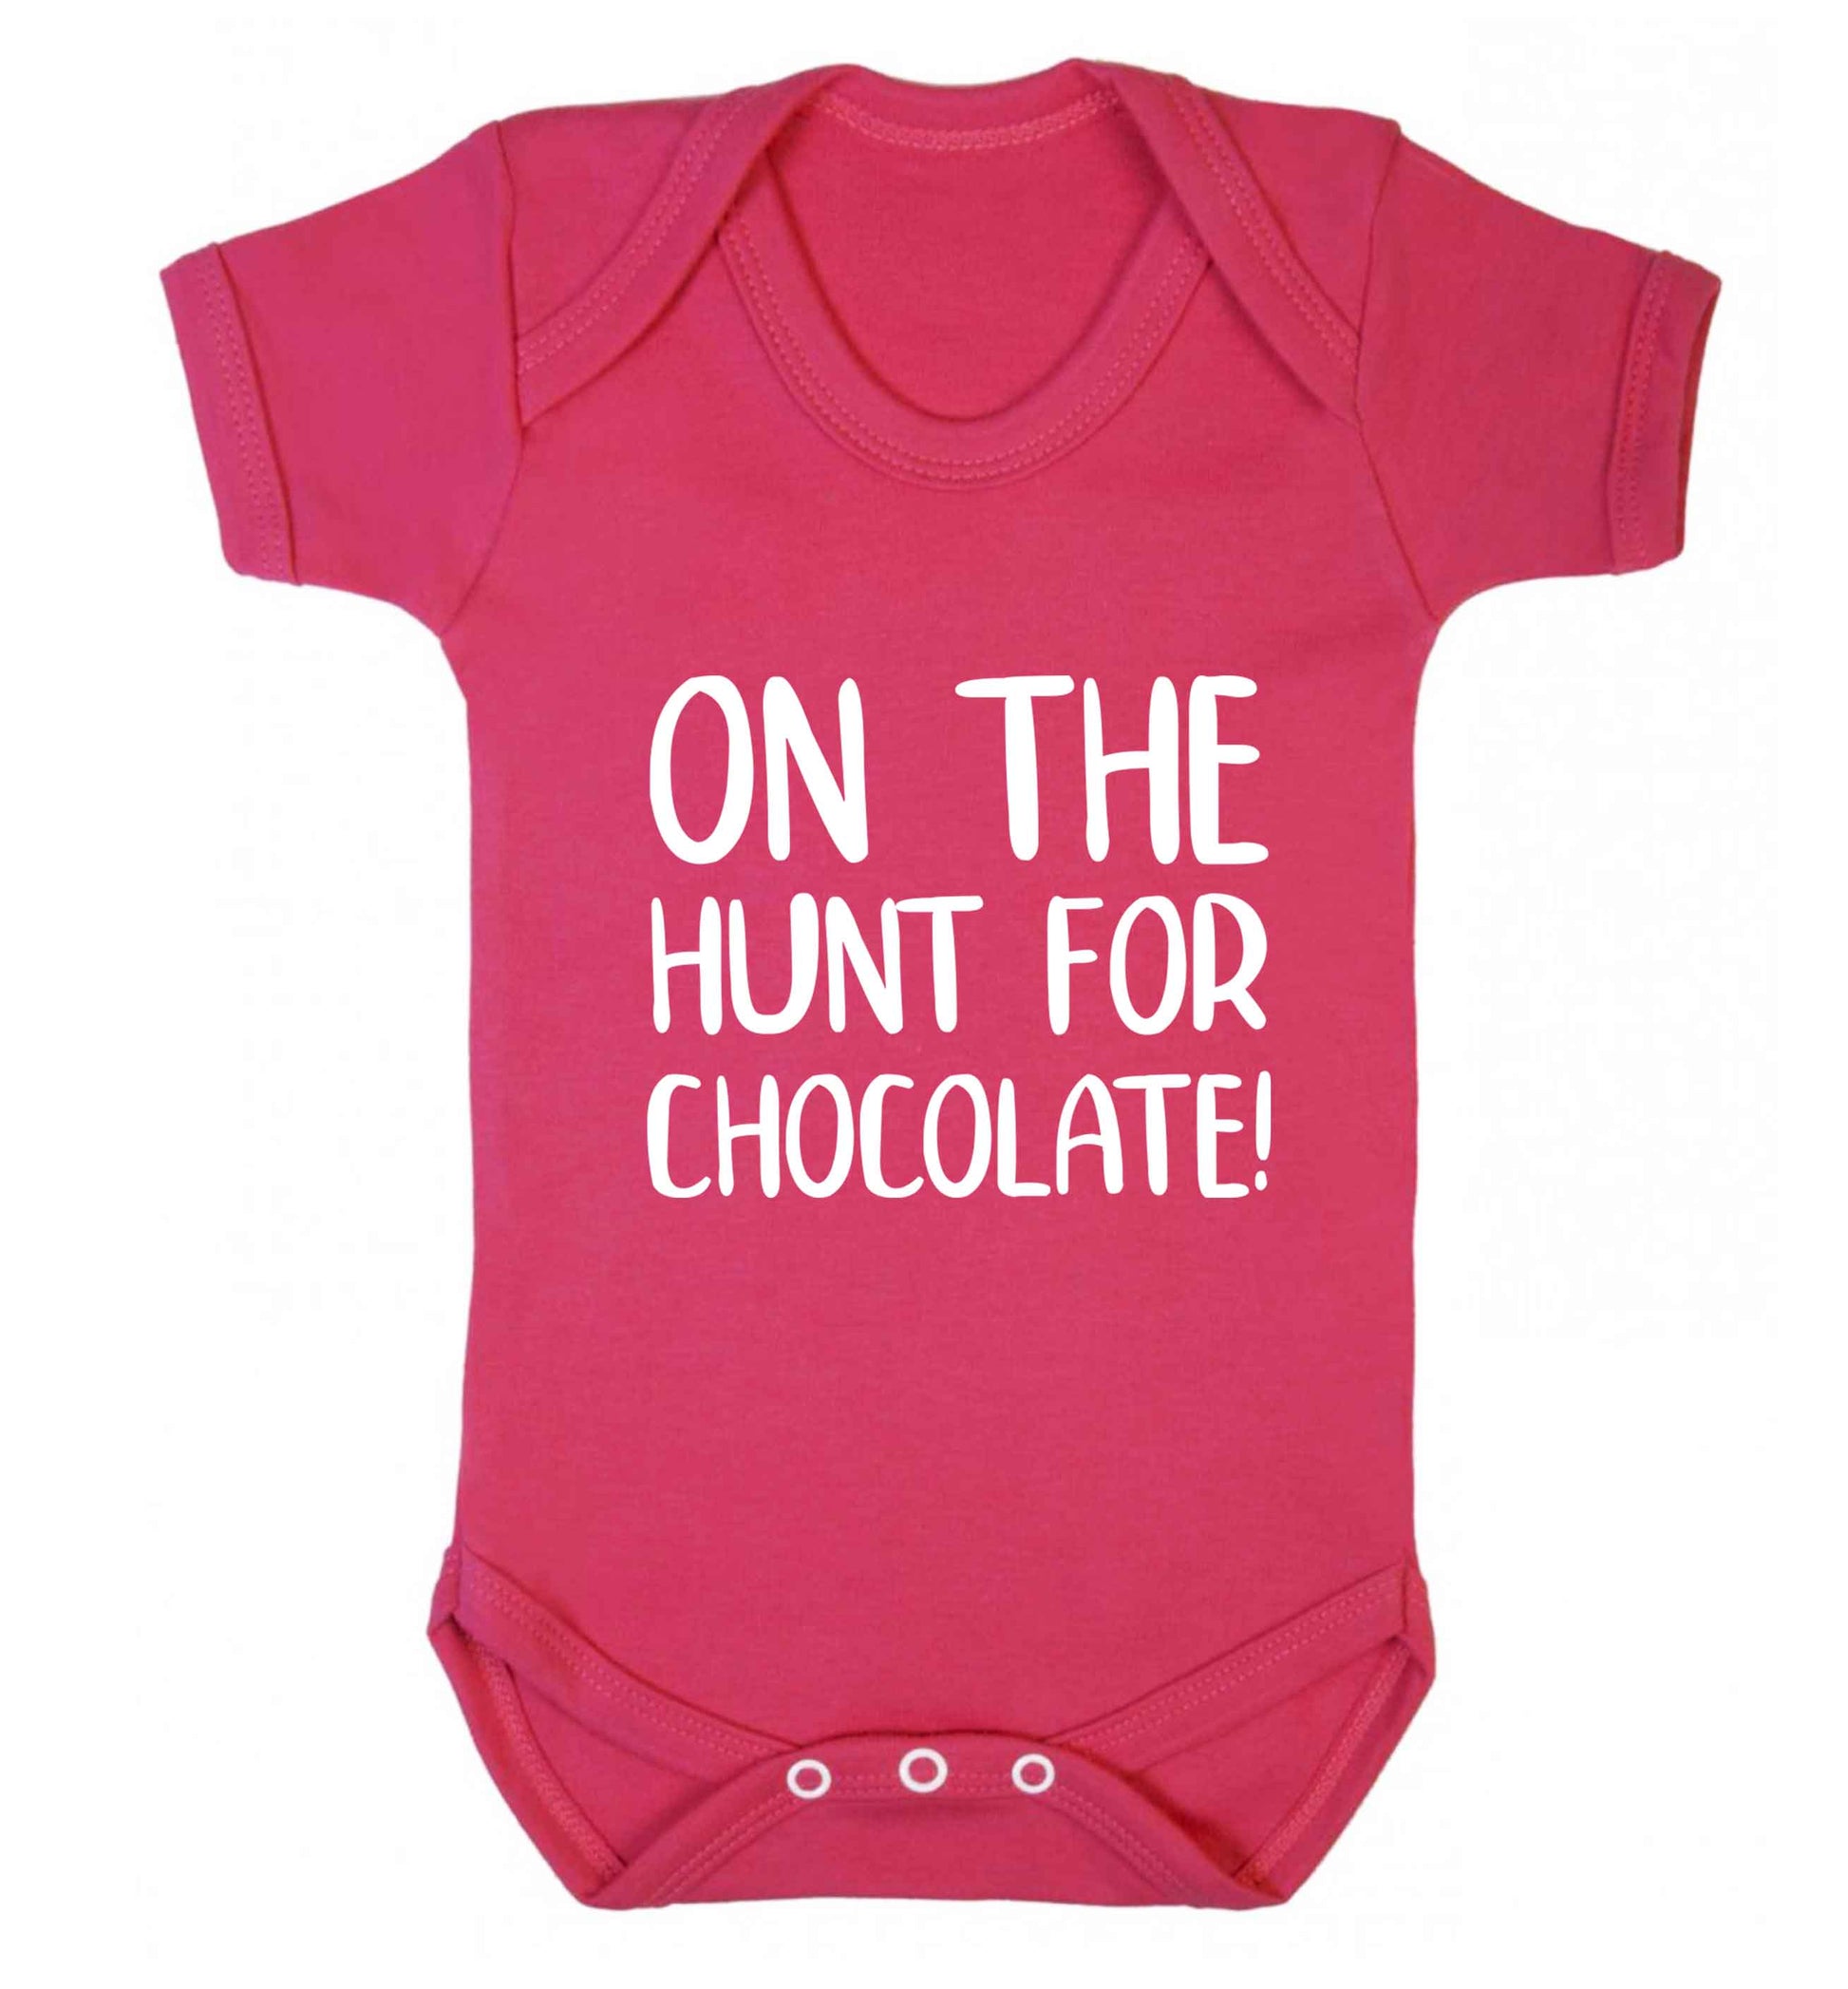 On the hunt for chocolate! baby vest dark pink 18-24 months